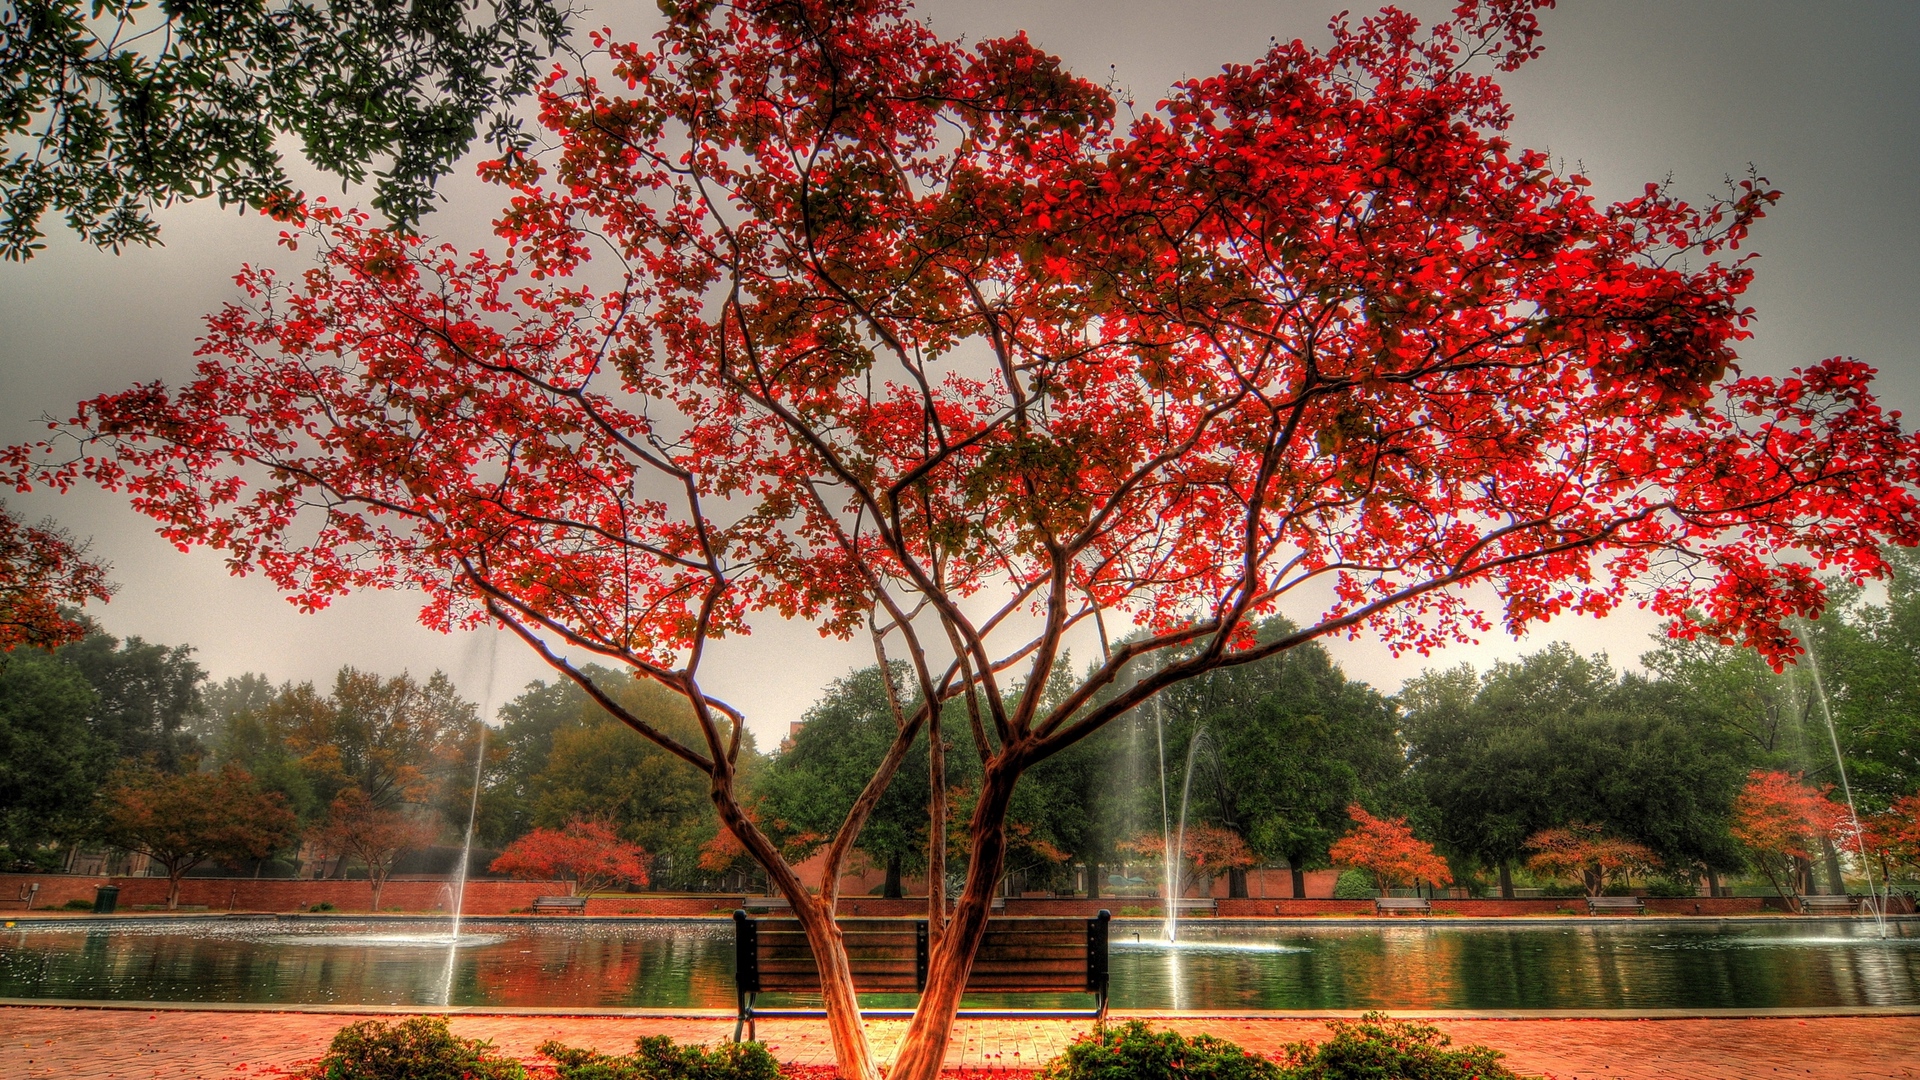 Park Beautiful Tree Bench Fountain View In Autumn - Red Autumn Tree Hd - HD Wallpaper 